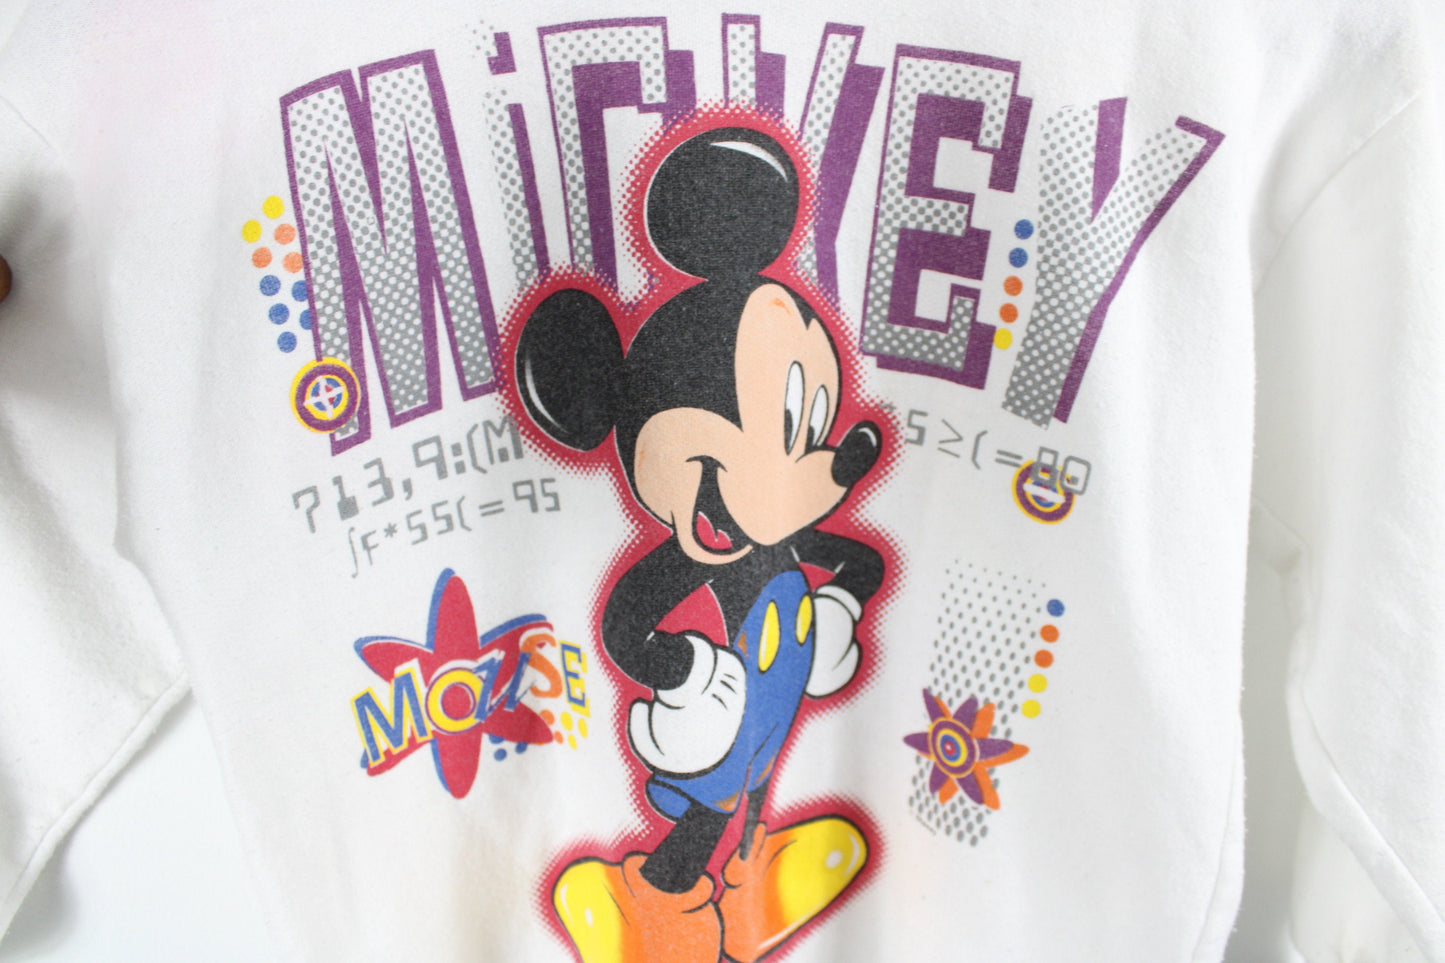 Vintage Disney Sweater / Minnie Mouse Sweatshirt / Youth / Toddler / Baby 90's / 2000's Clothing